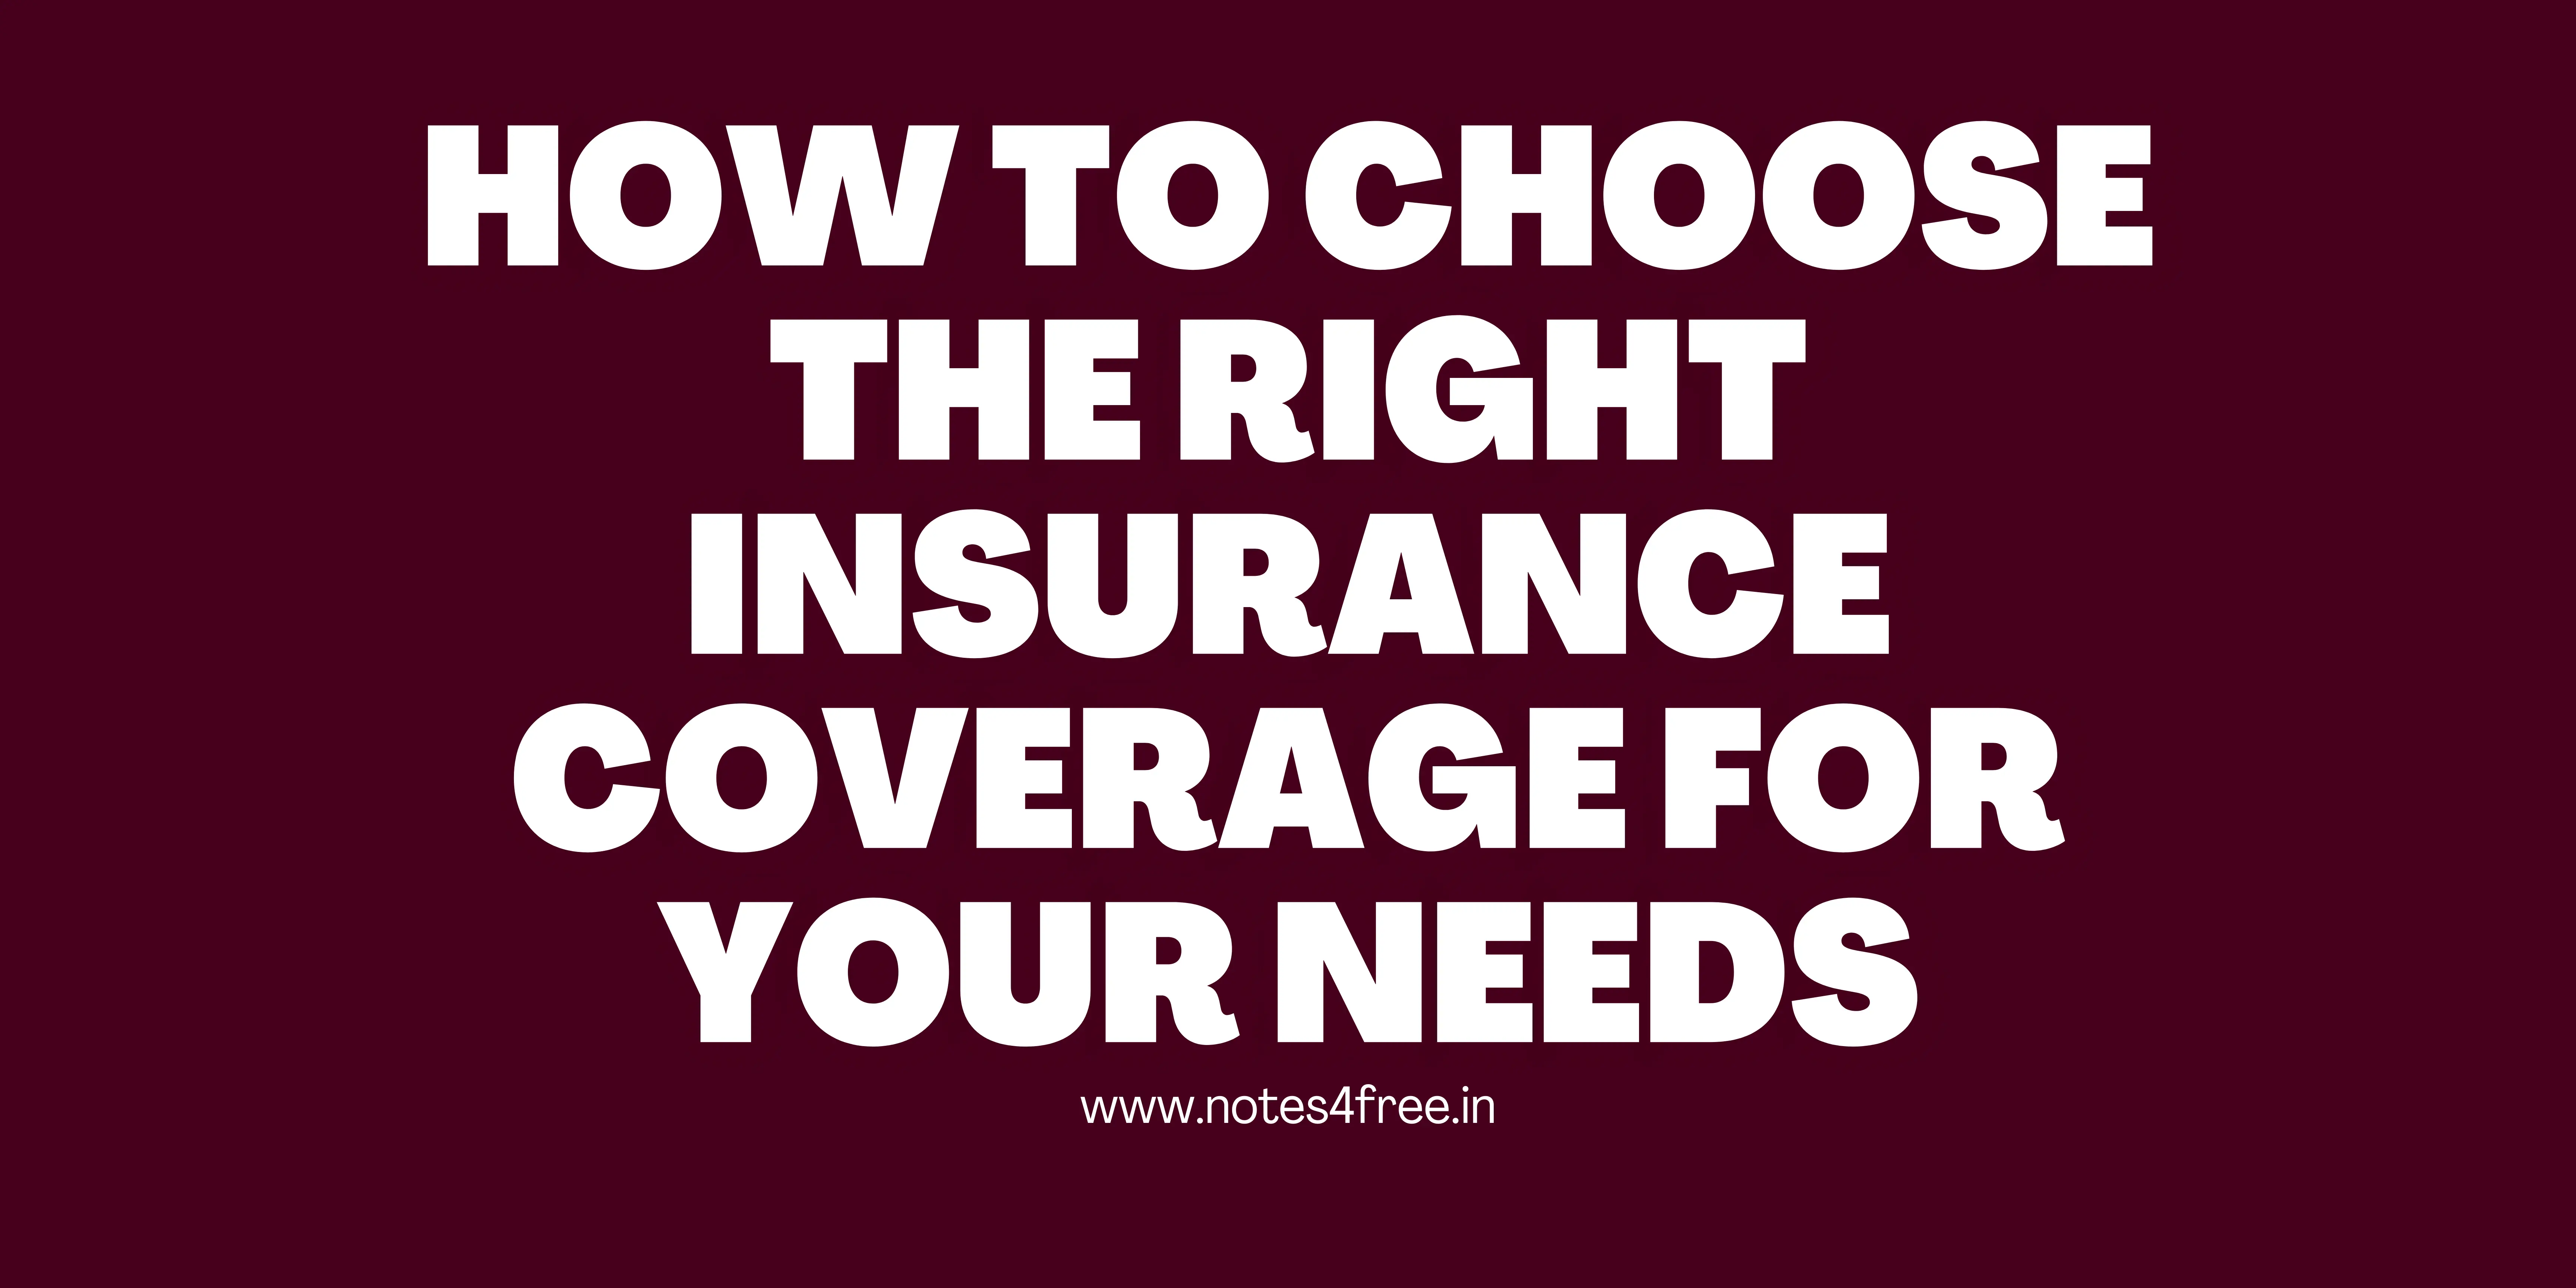 How to Choose the Right Insurance Coverage for Your Needs